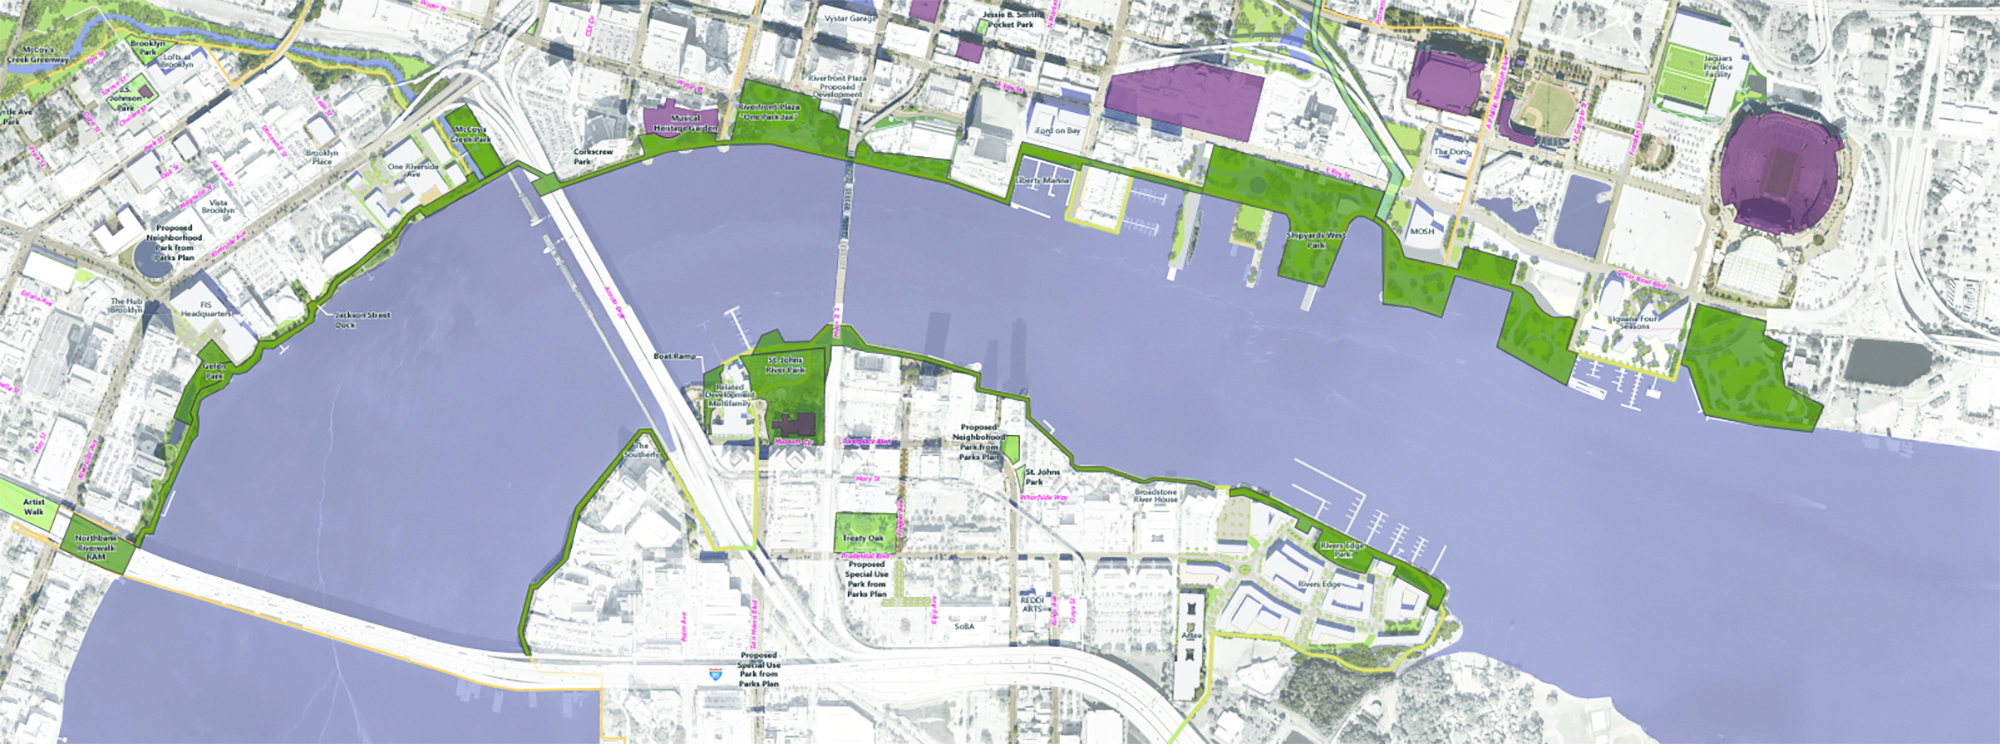 The areas highlighted in green are planned or current park and public space along the St. Johns River Downtown in the city’s master plan. The purple areas are other public facilities, such as TIAA Bank Field.